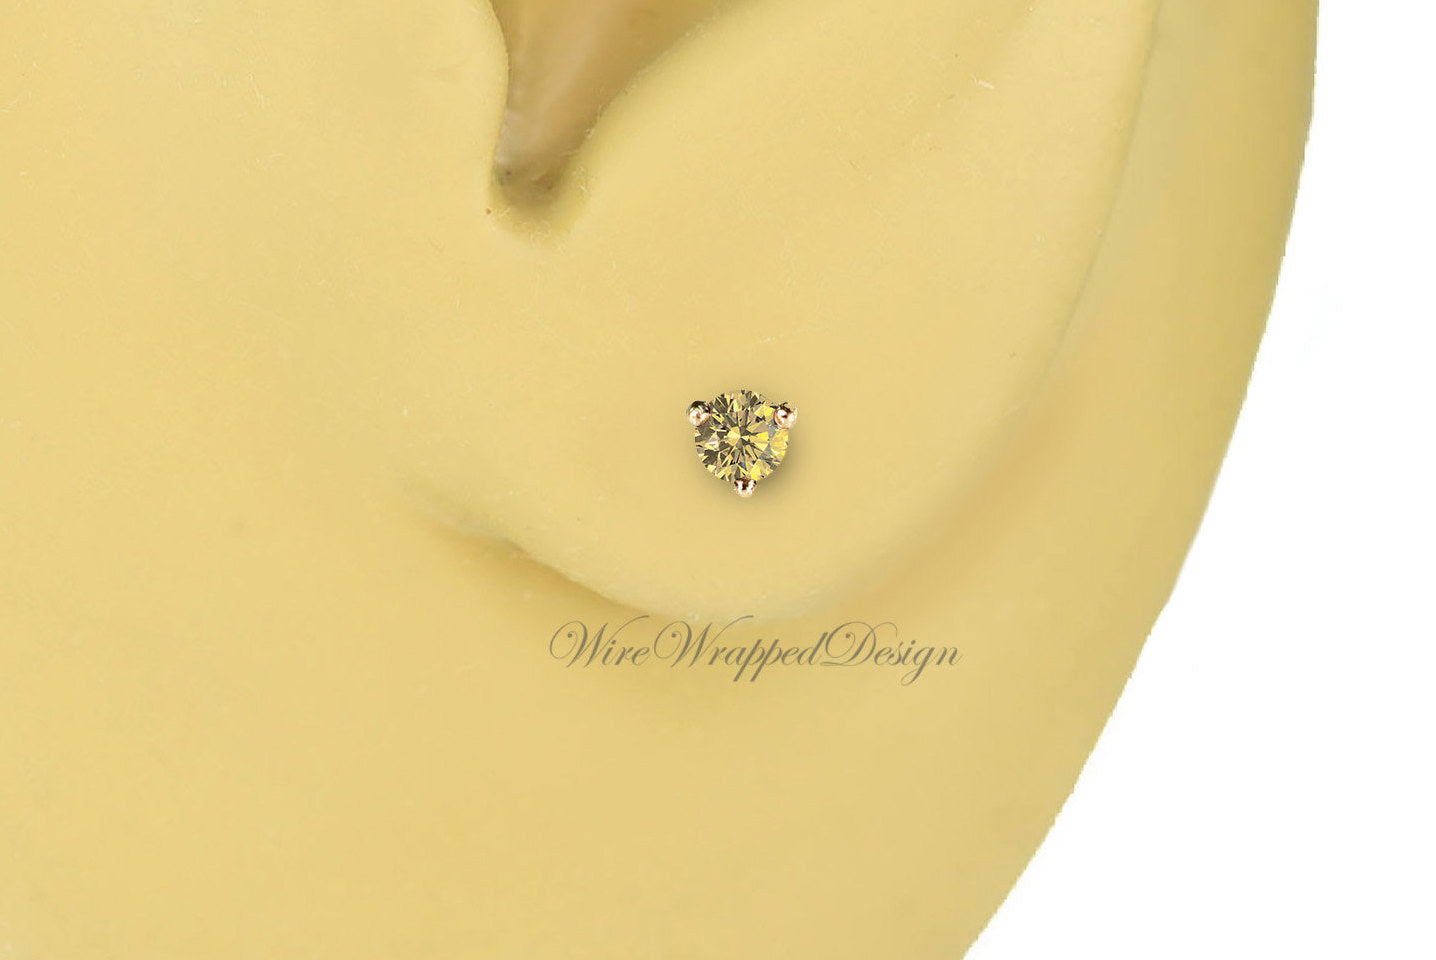 PAIR Genuine LIGHT Yellow DIAMOND Earrings Studs 2.5mm 0.12tcw Martini 14k Solid Gold Yellow/Rose/White Platinum Silver Cartilage Helix